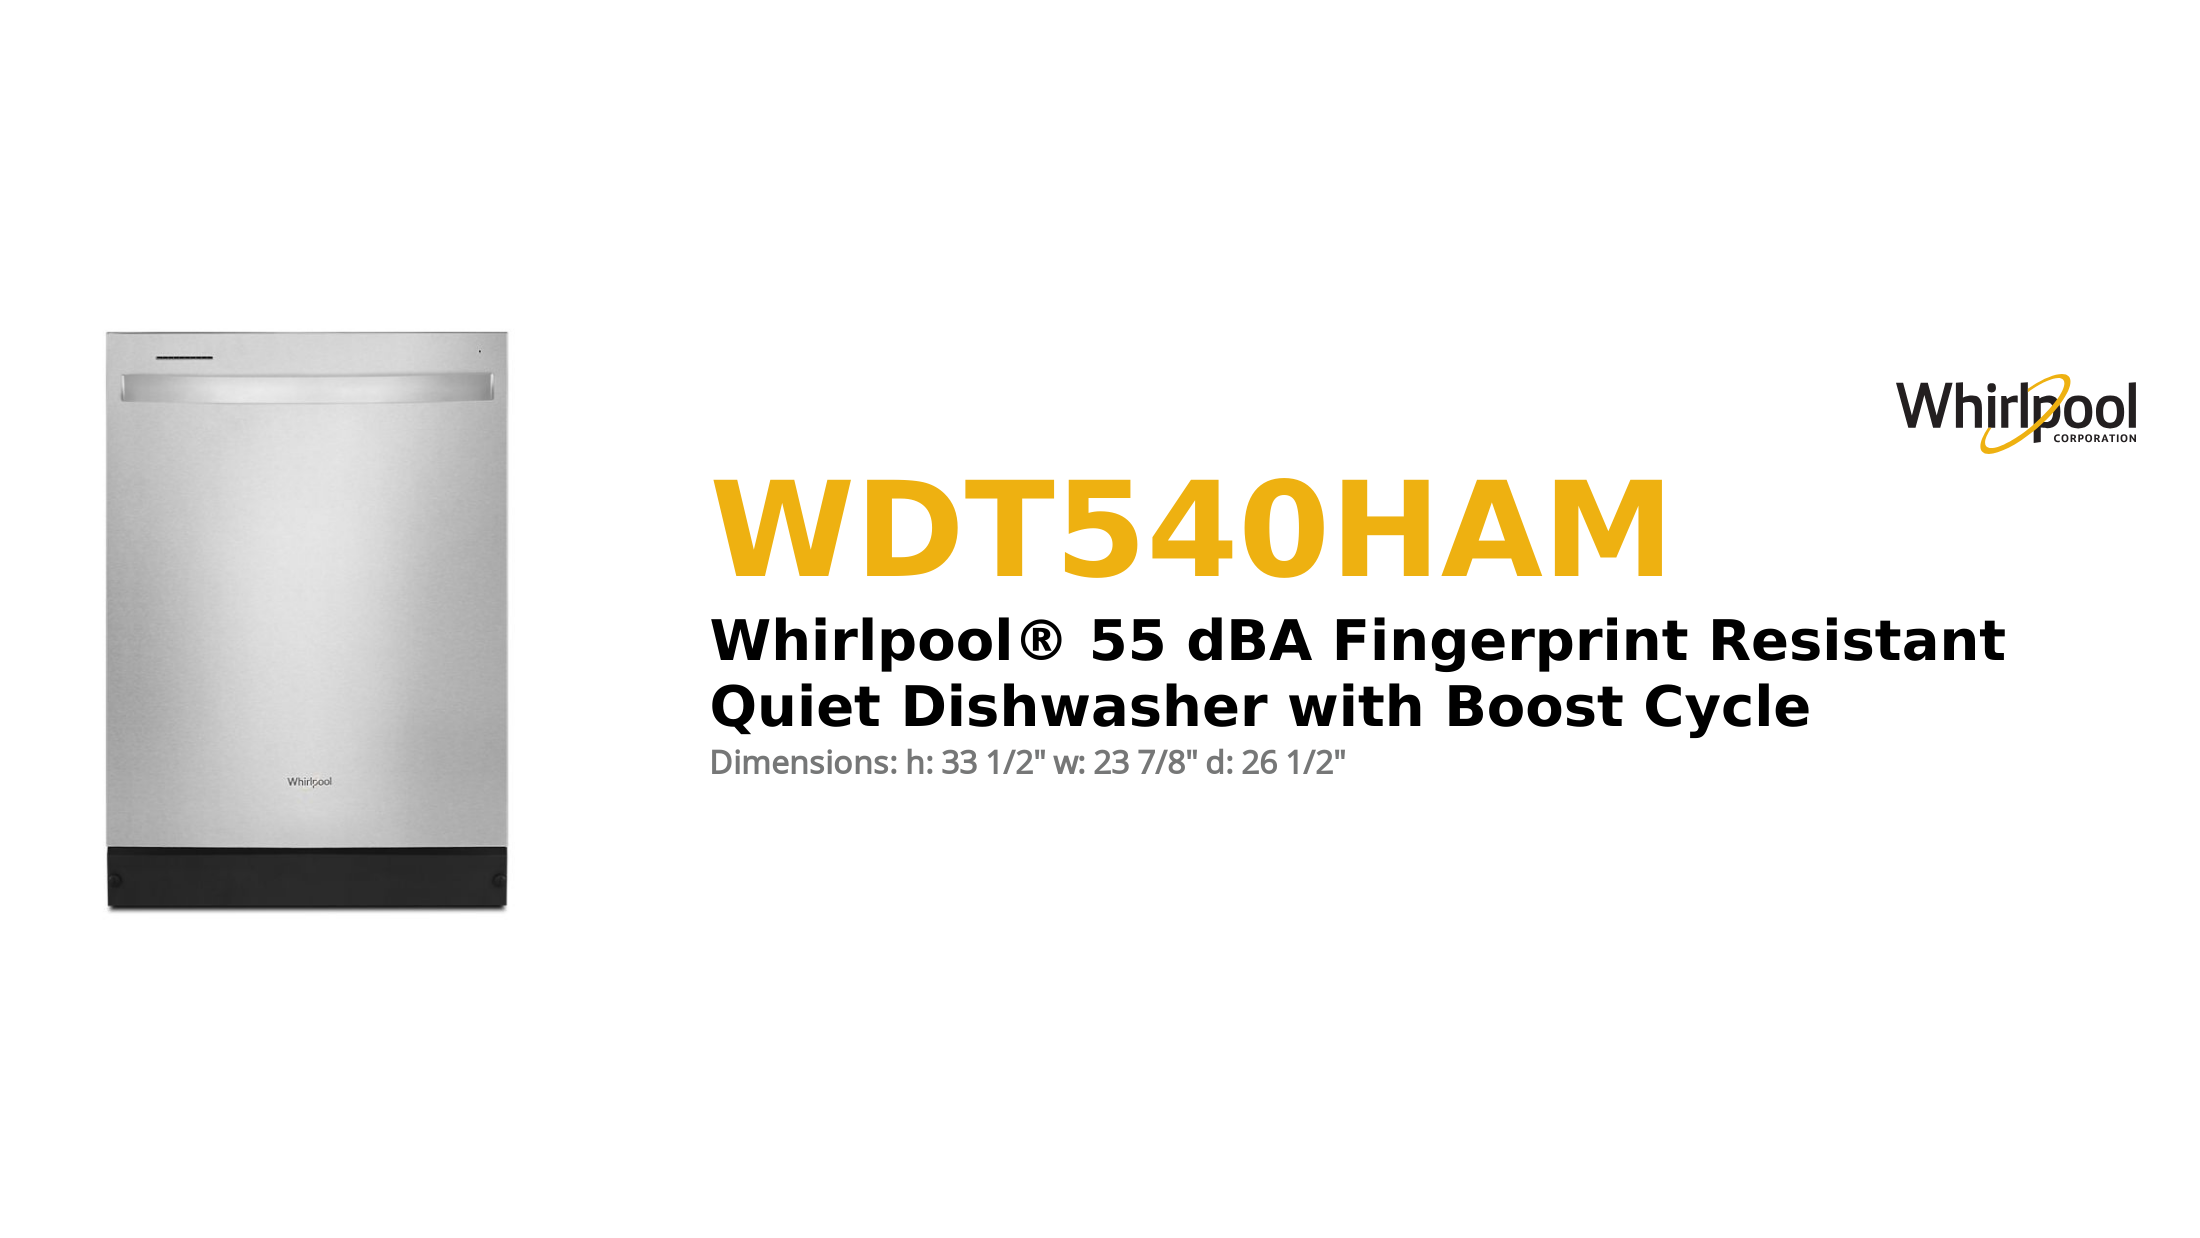 Whirlpool® 55 dBA Fingerprint Resistant Quiet Dishwasher with Boost Cycle